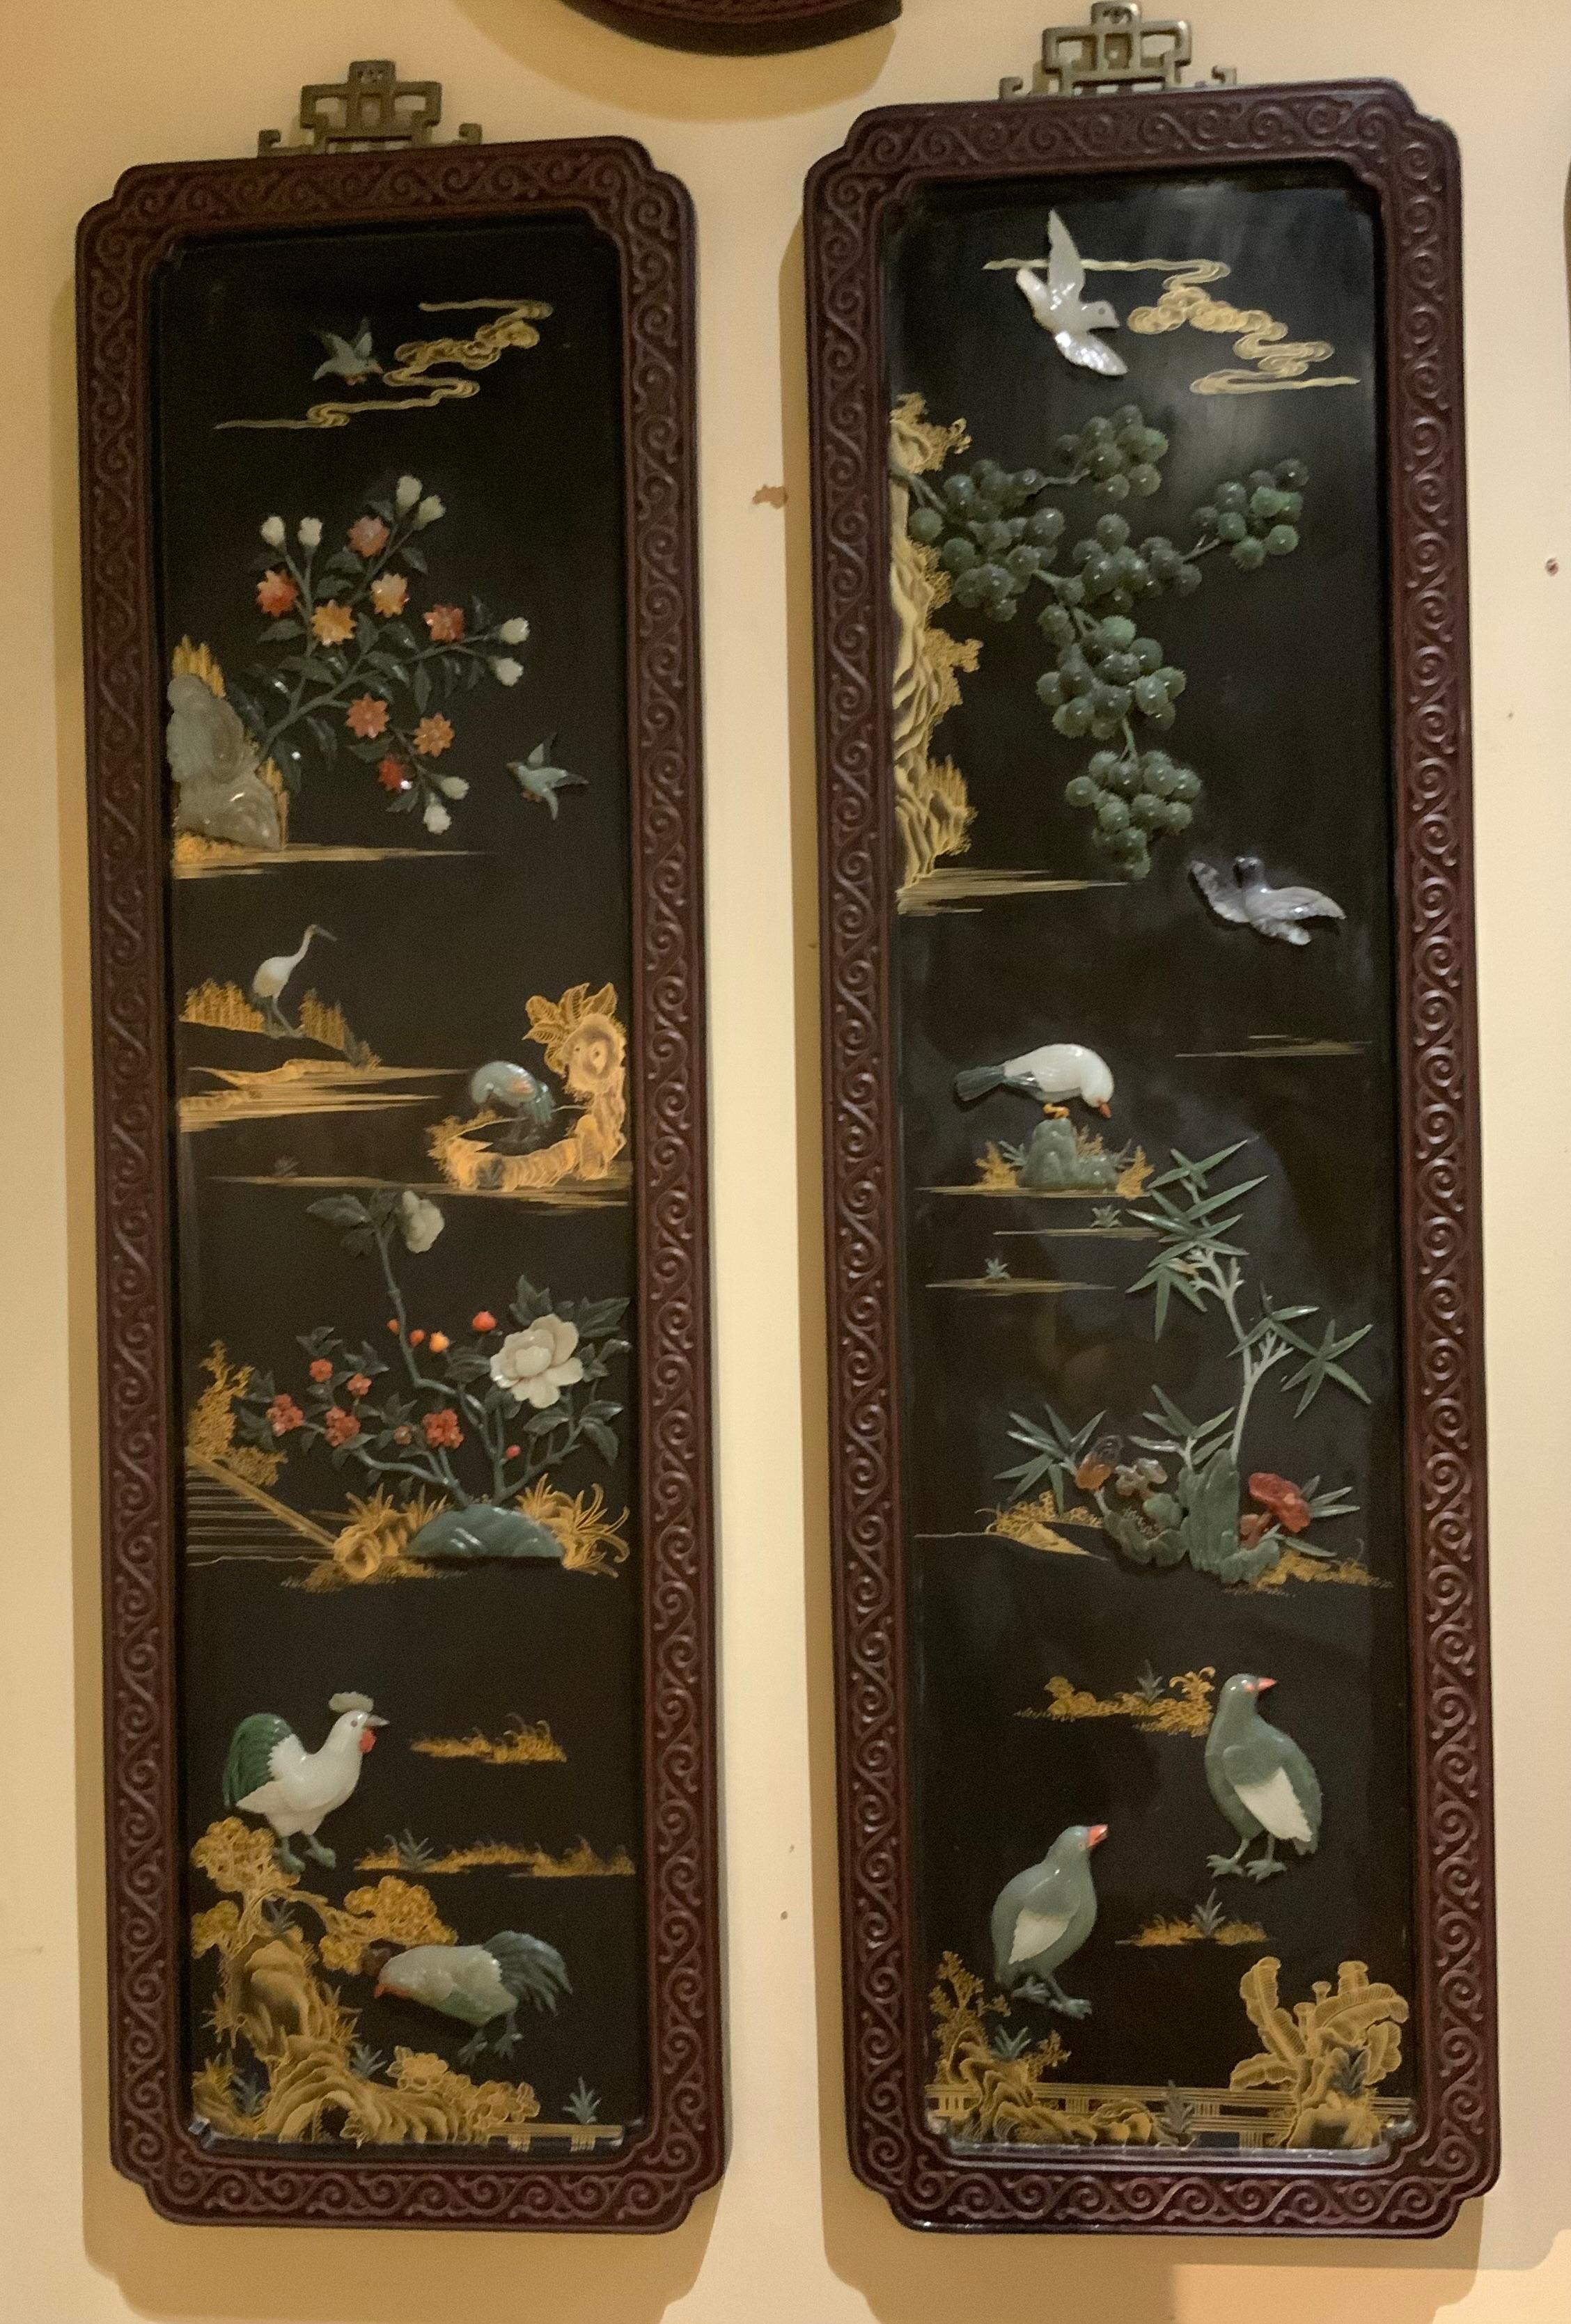 Set of four excellent panels in wood carved frames with semi precious 
Stones of jade, coral and a combination of other hard stones 
The carving is of the highest quality and the condition is exceptional.
